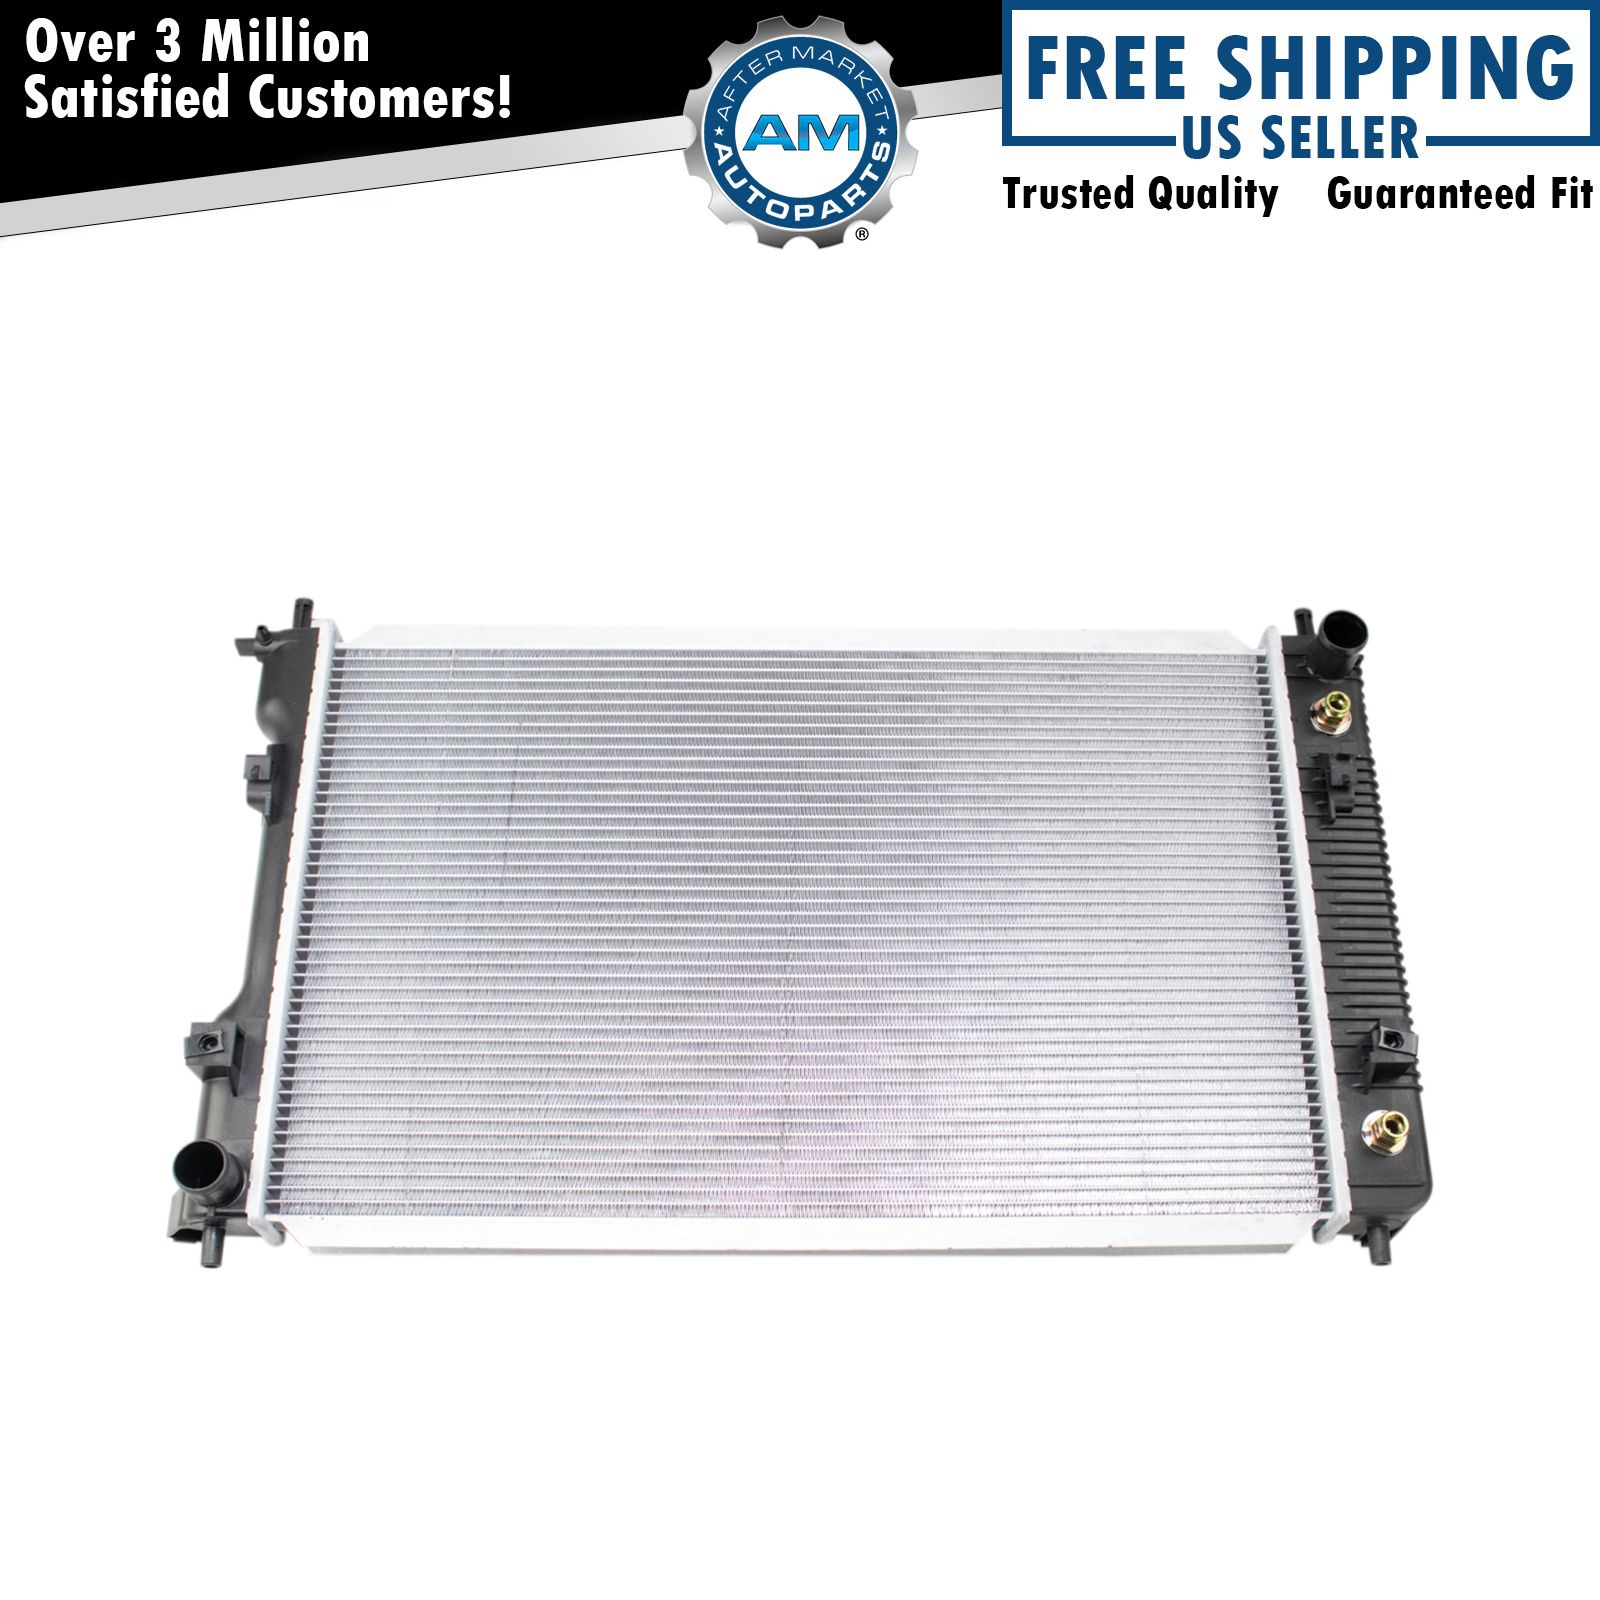 Radiator Assembly Aluminum Core Direct Fit for Terrain Equinox SUV